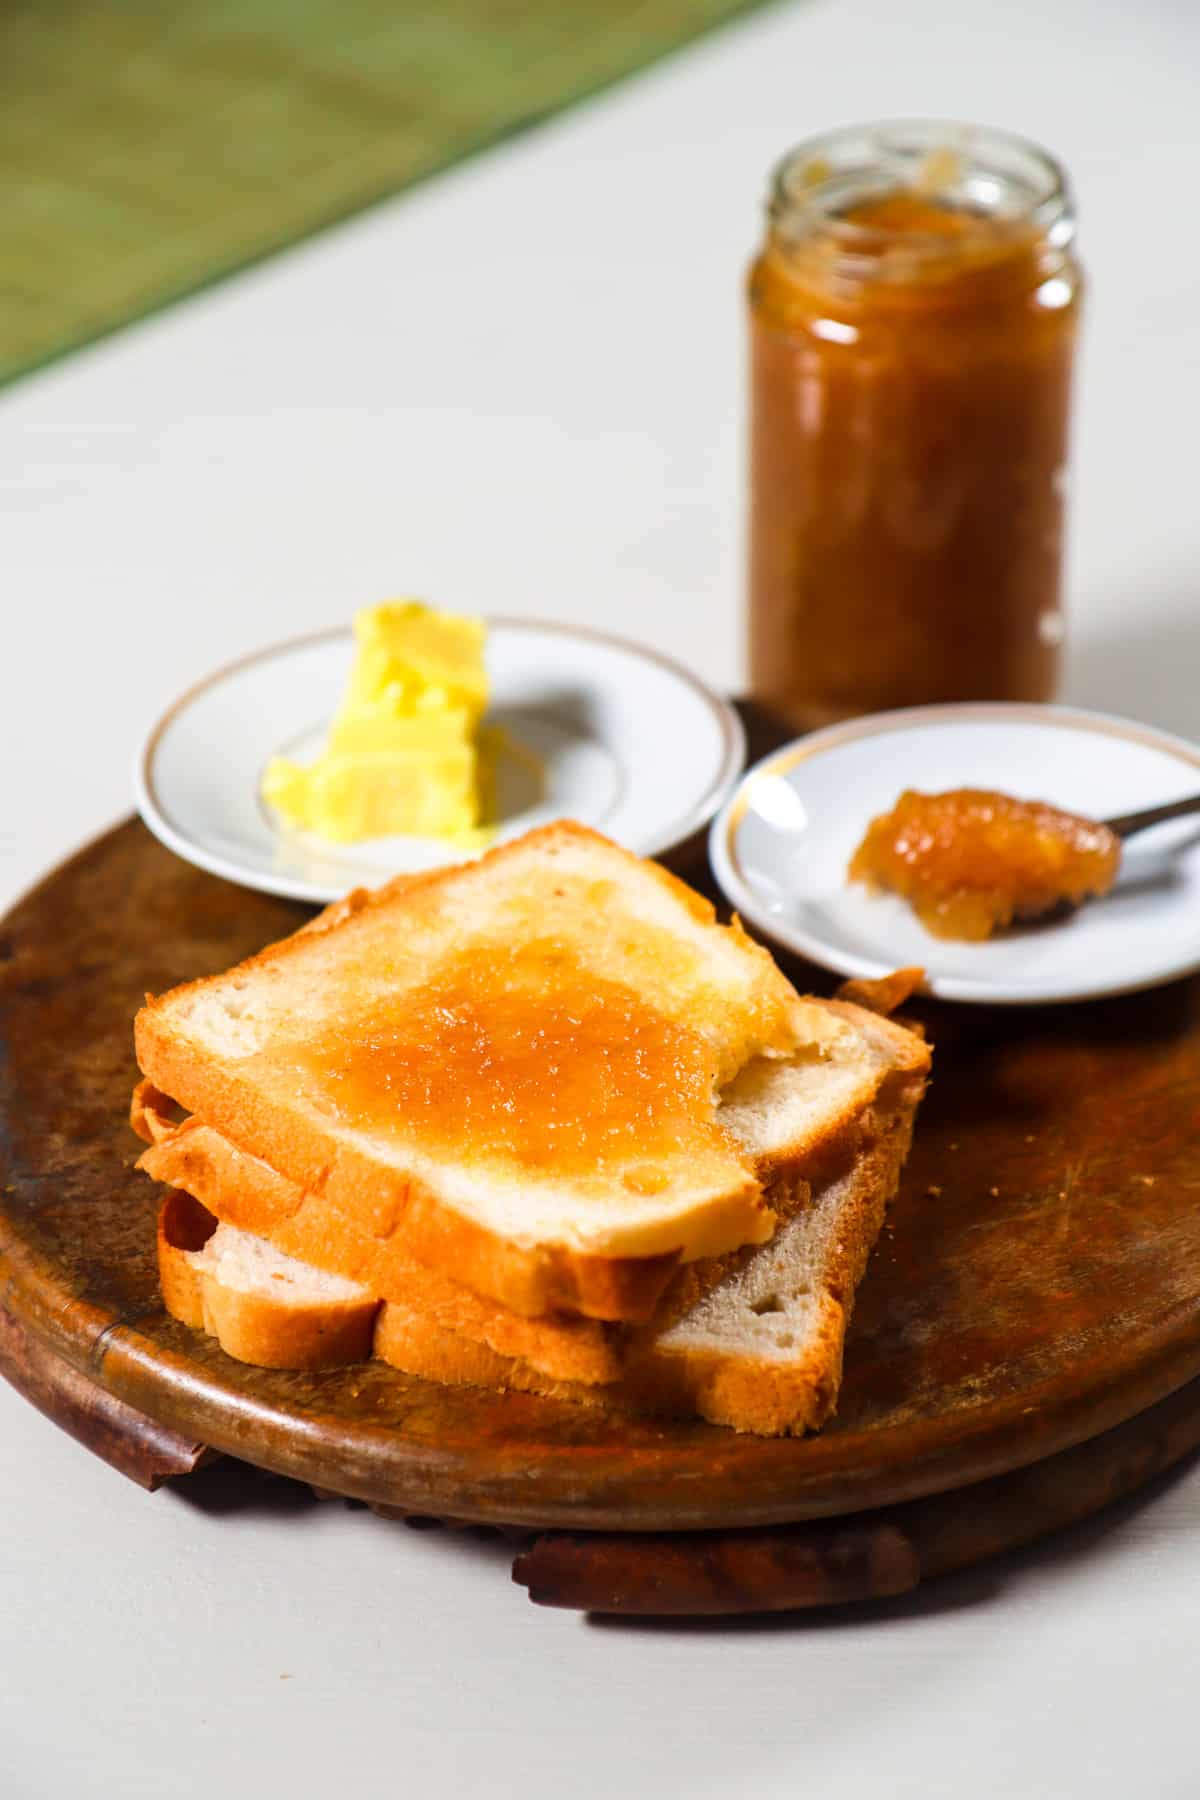 pear jam spread on a toast with jar of jam in the background.